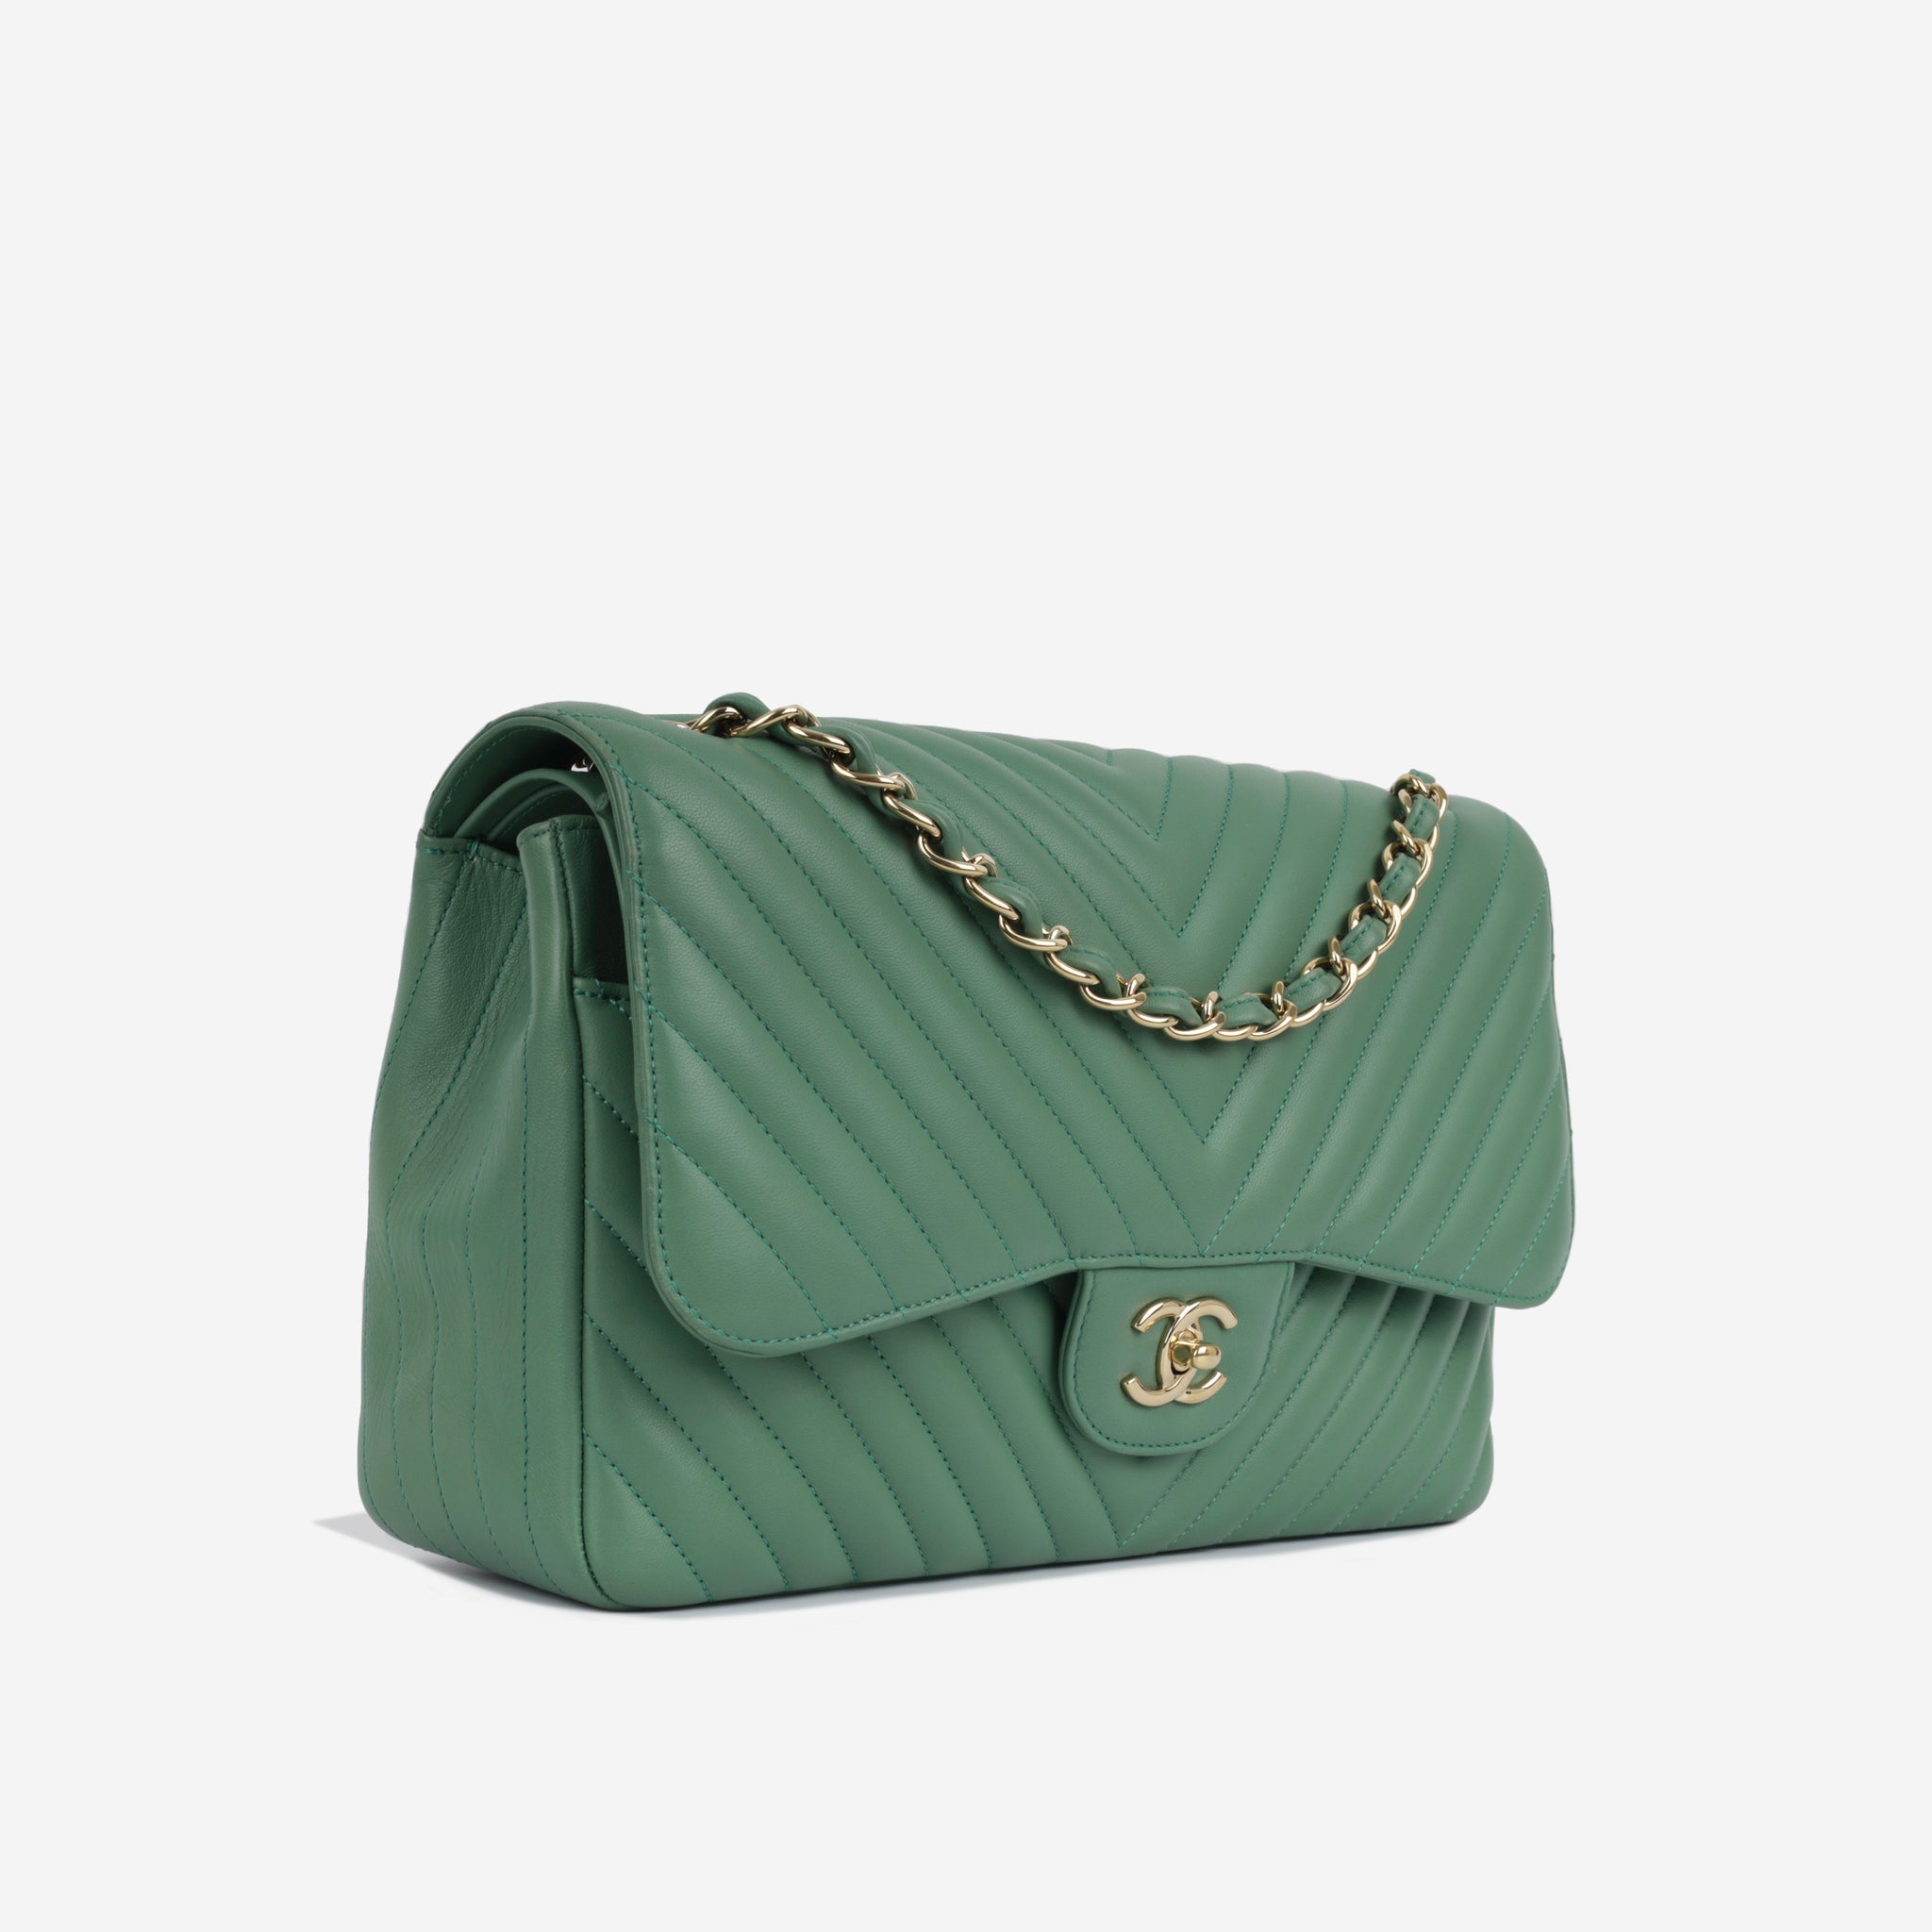 Chanel CF A01113 Classic Flap Bag in Lambskin Green - lushenticbags